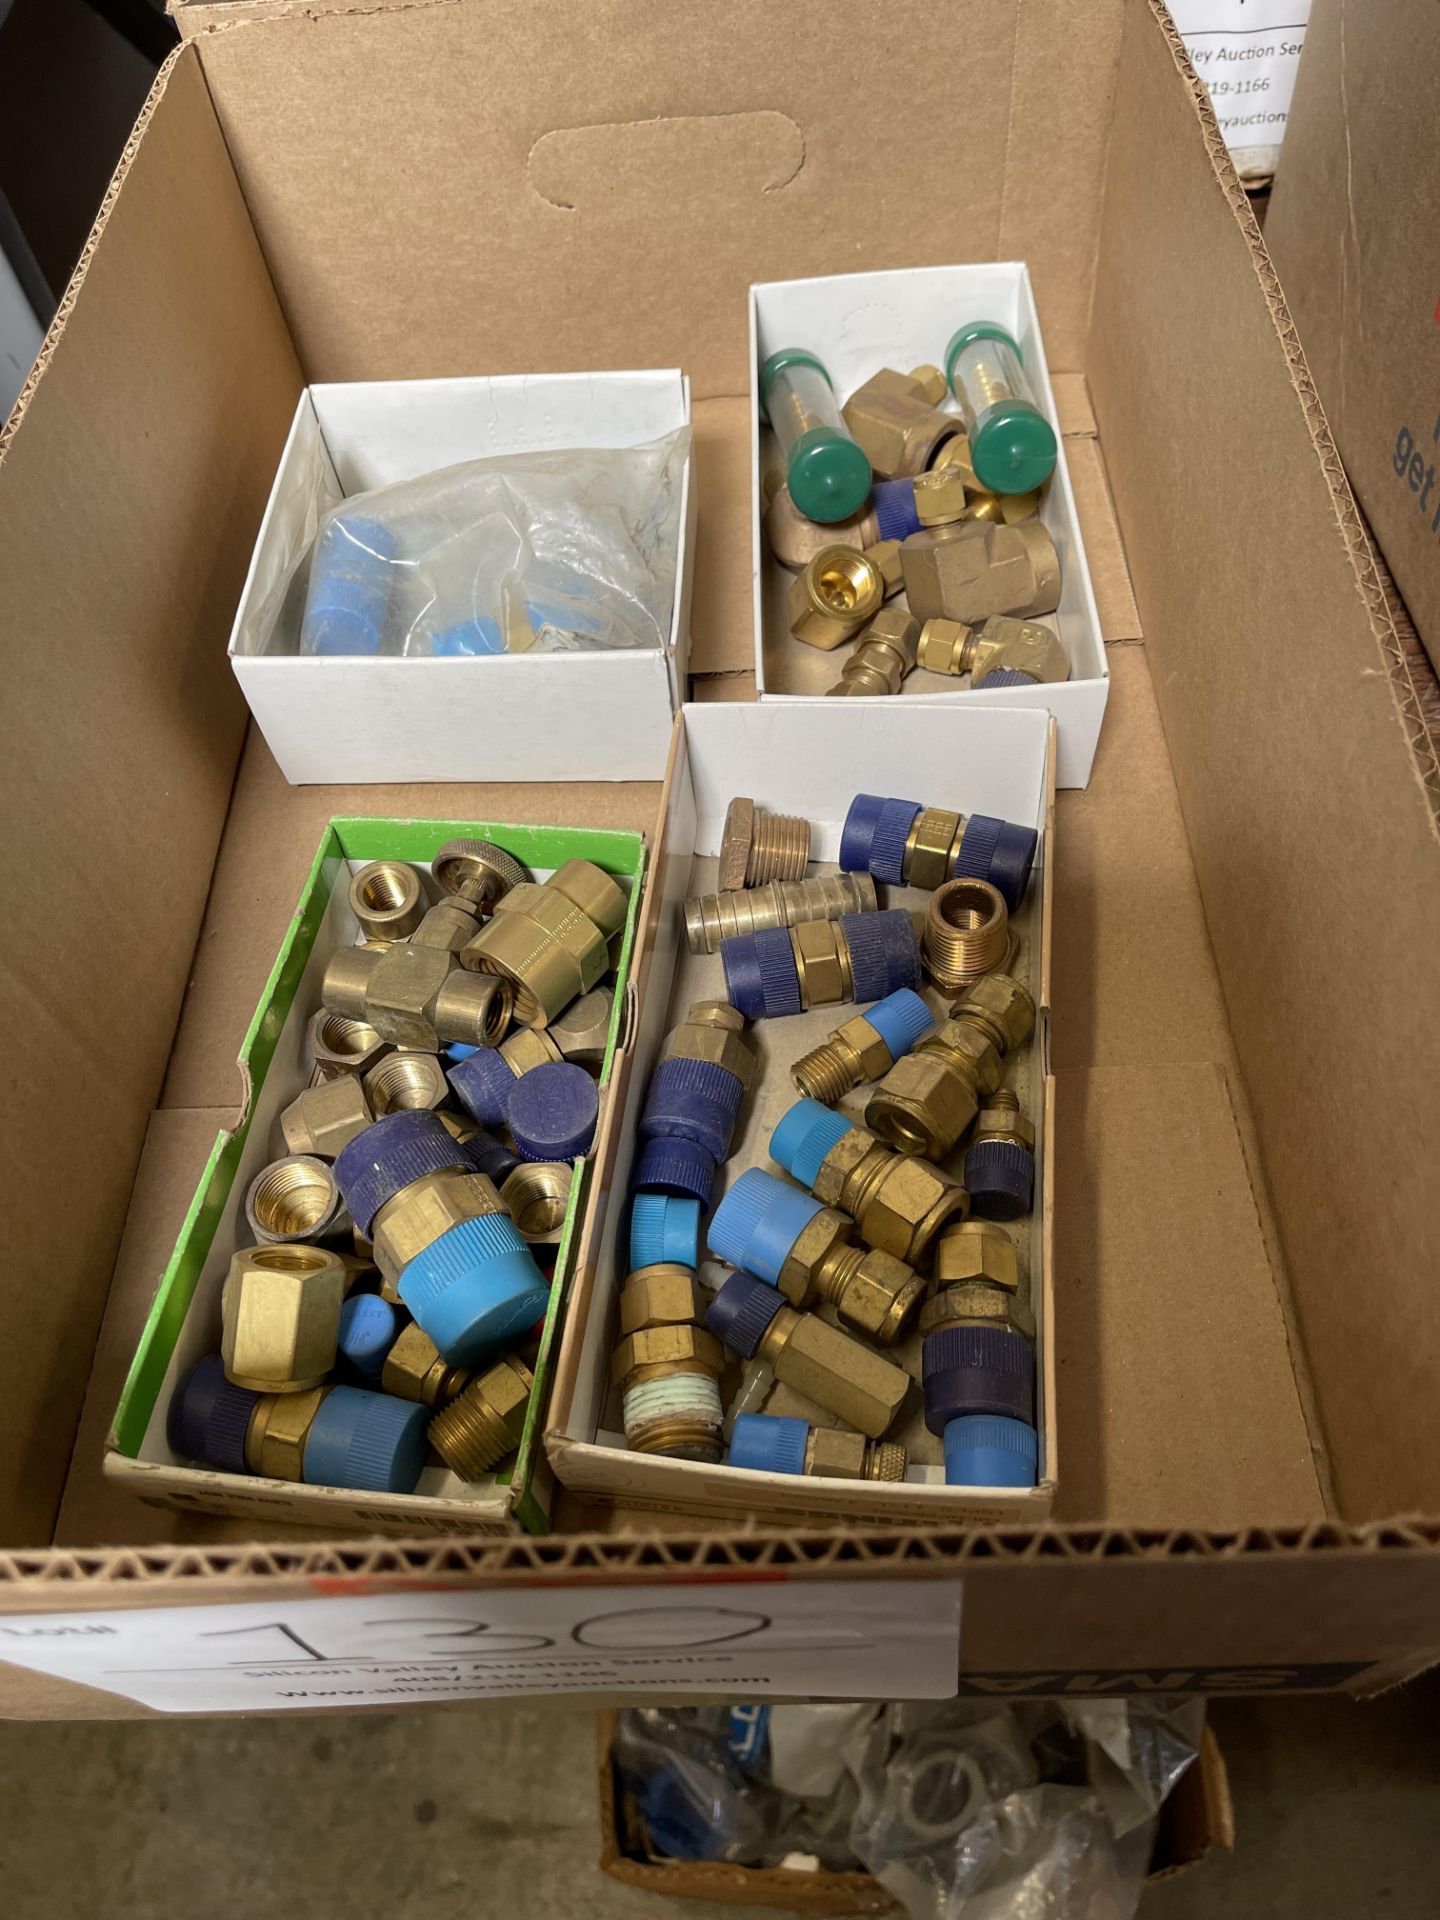 Miscellaneous brass fittings